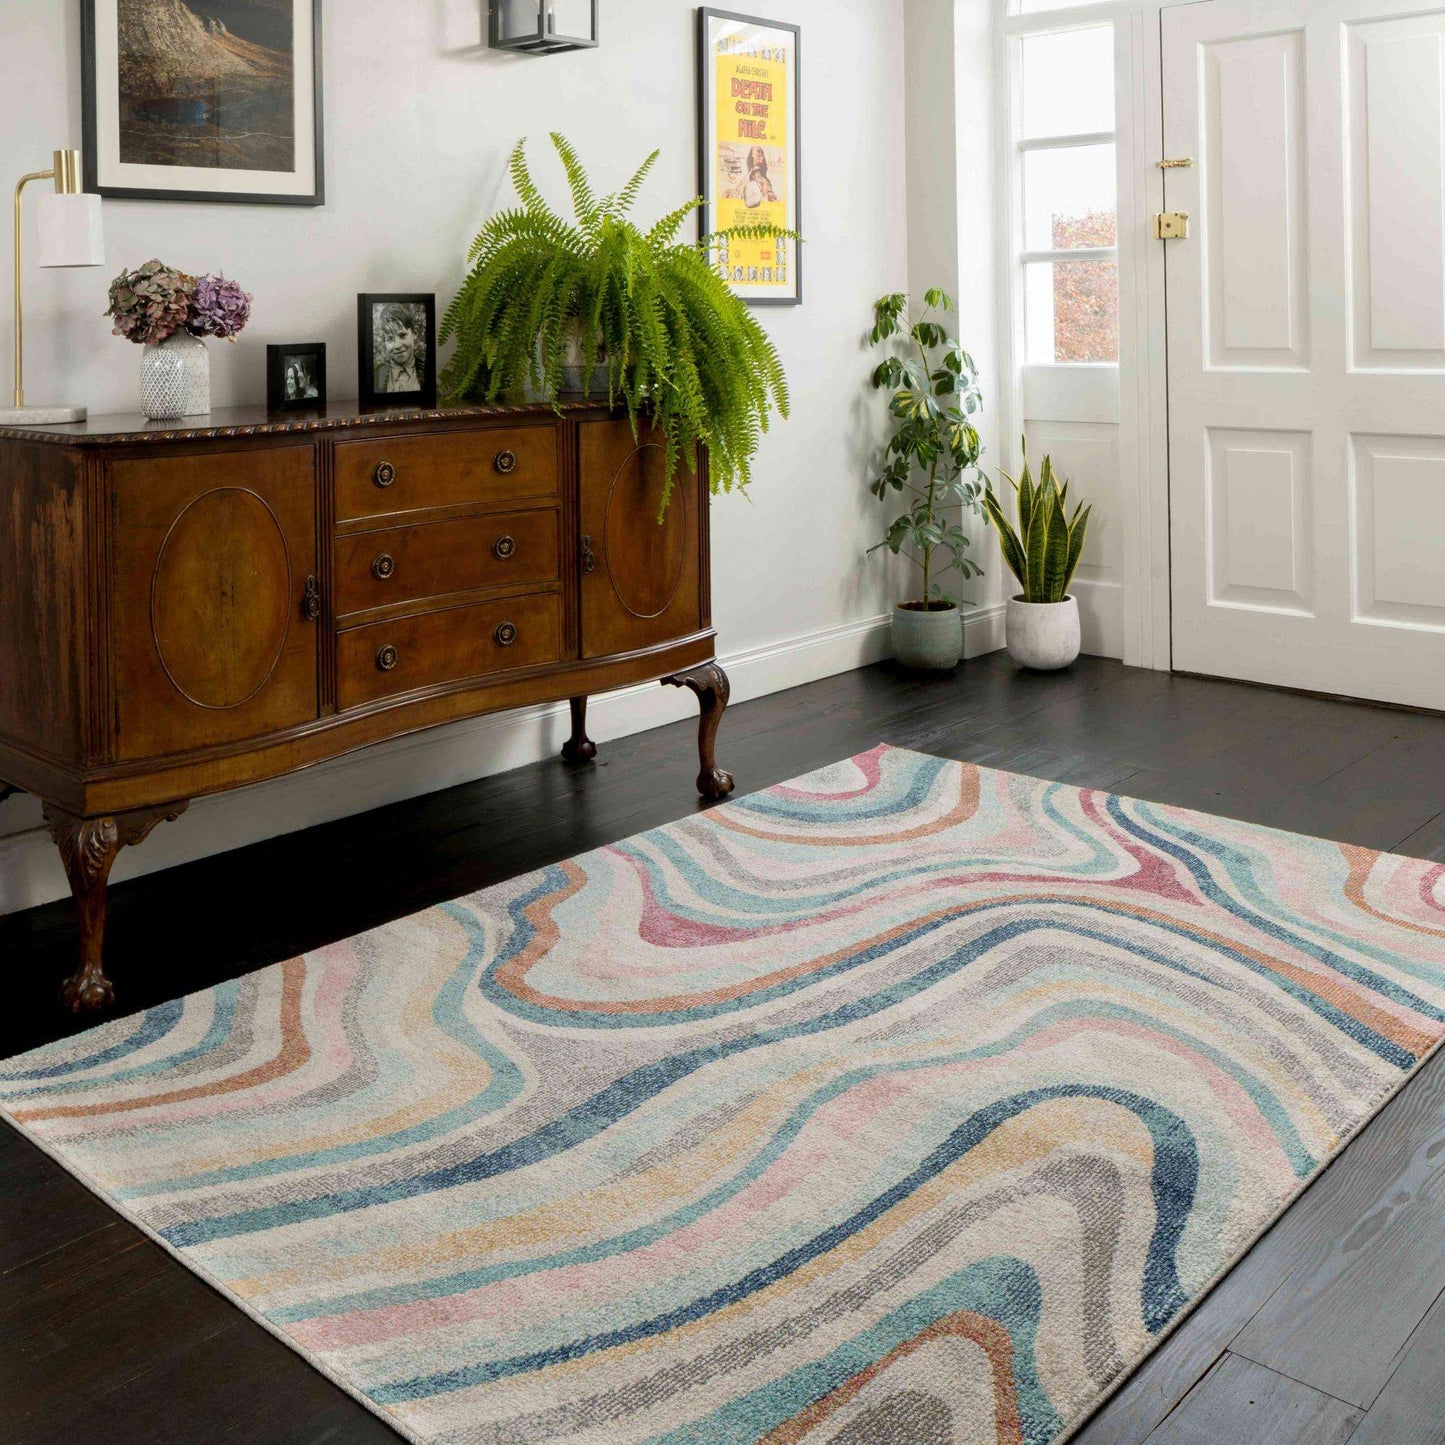 Soft Abstract Marbled Multicolour Living Room Rug